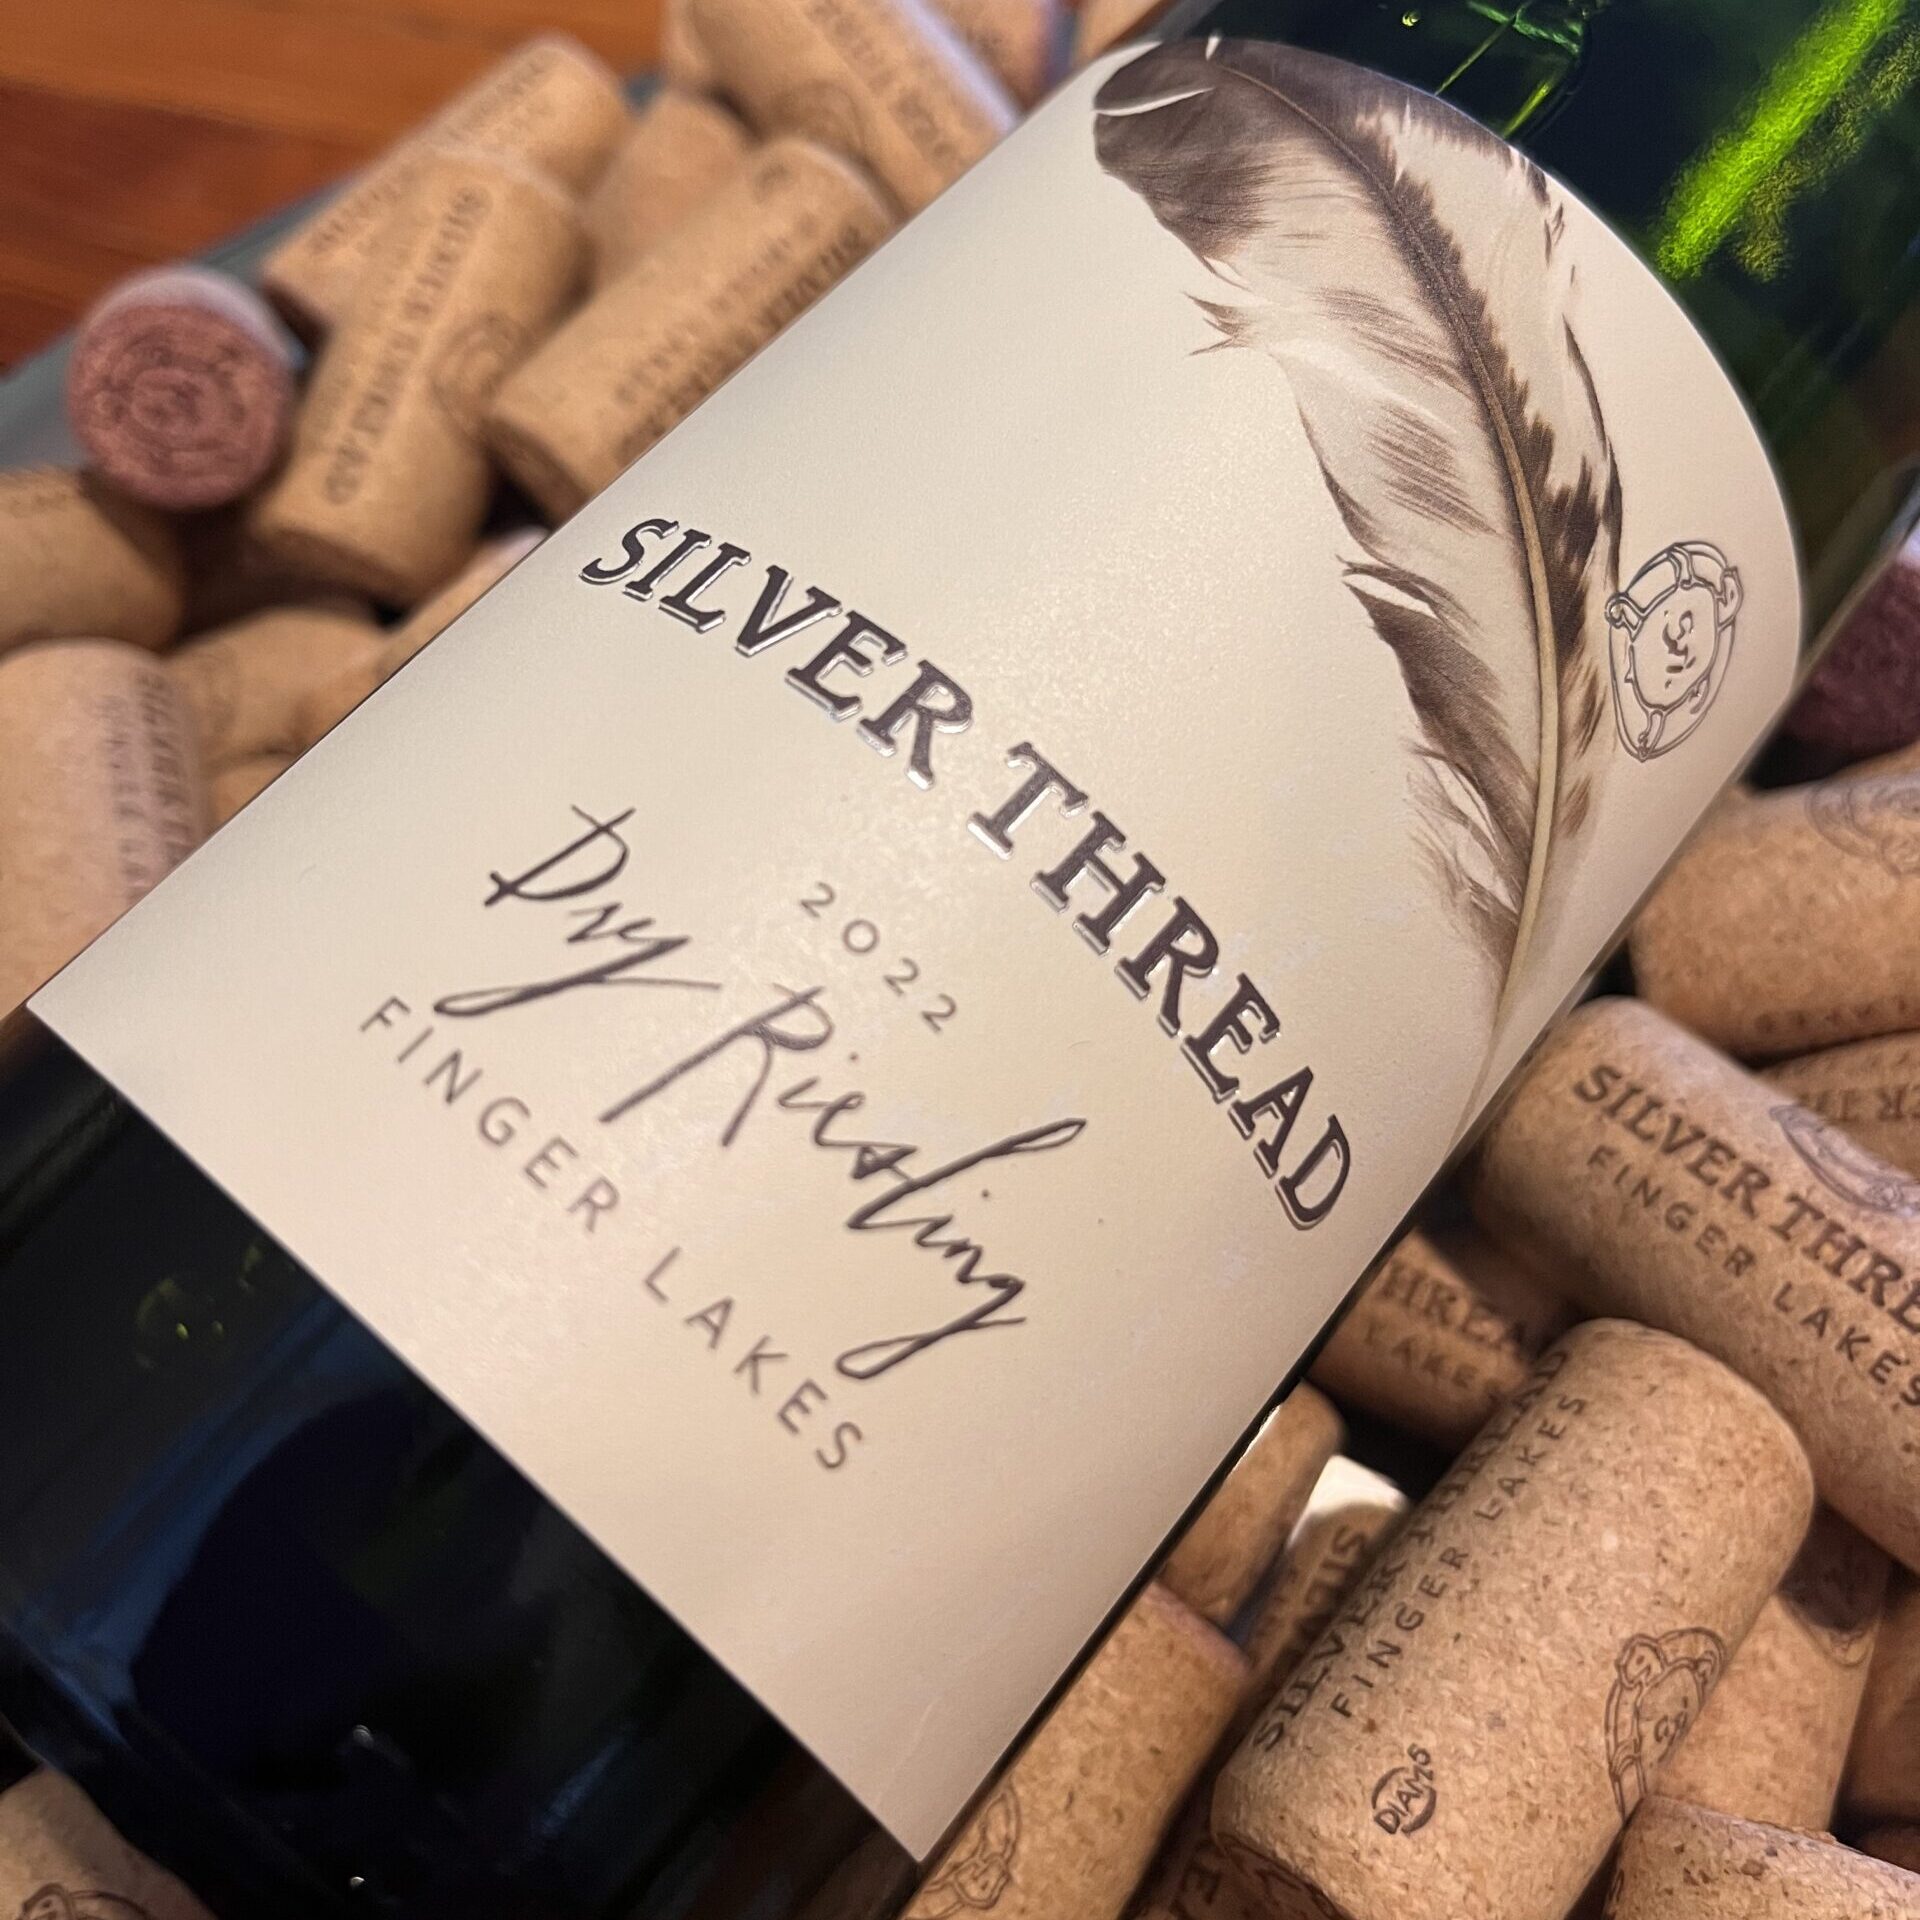 Dry Riesling 2022 bottle